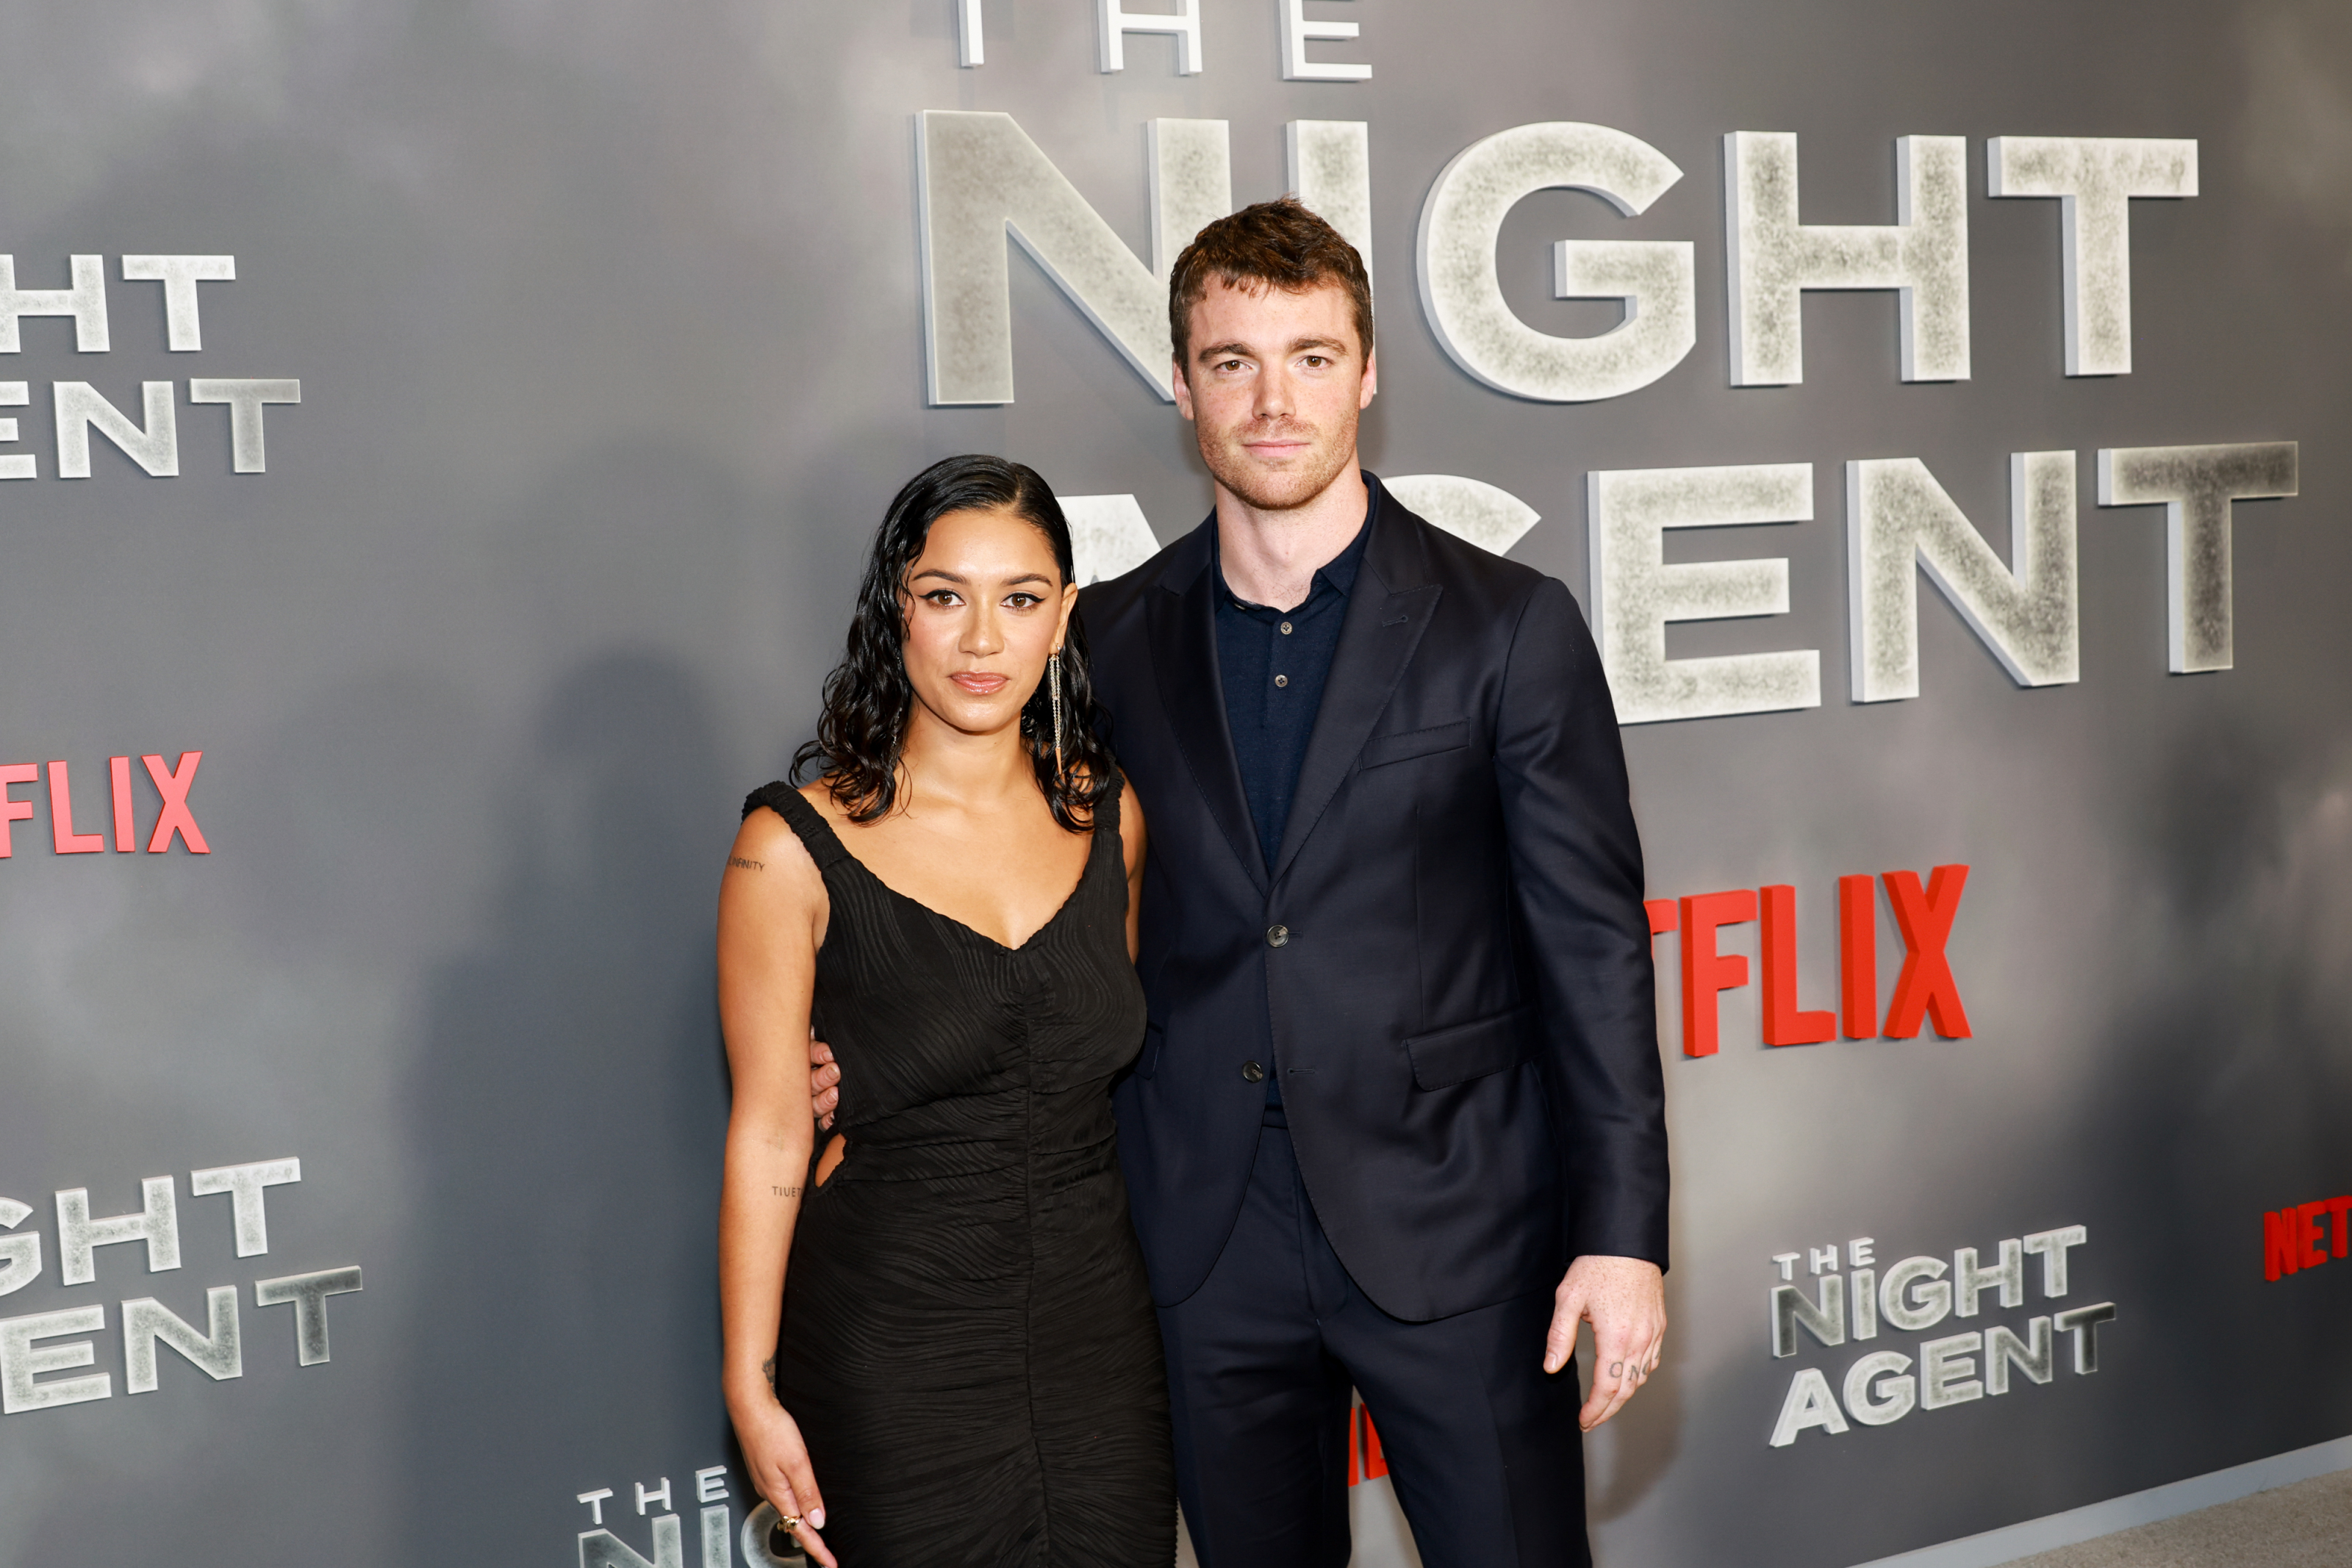 The Night Agent Cast, News, Videos and more